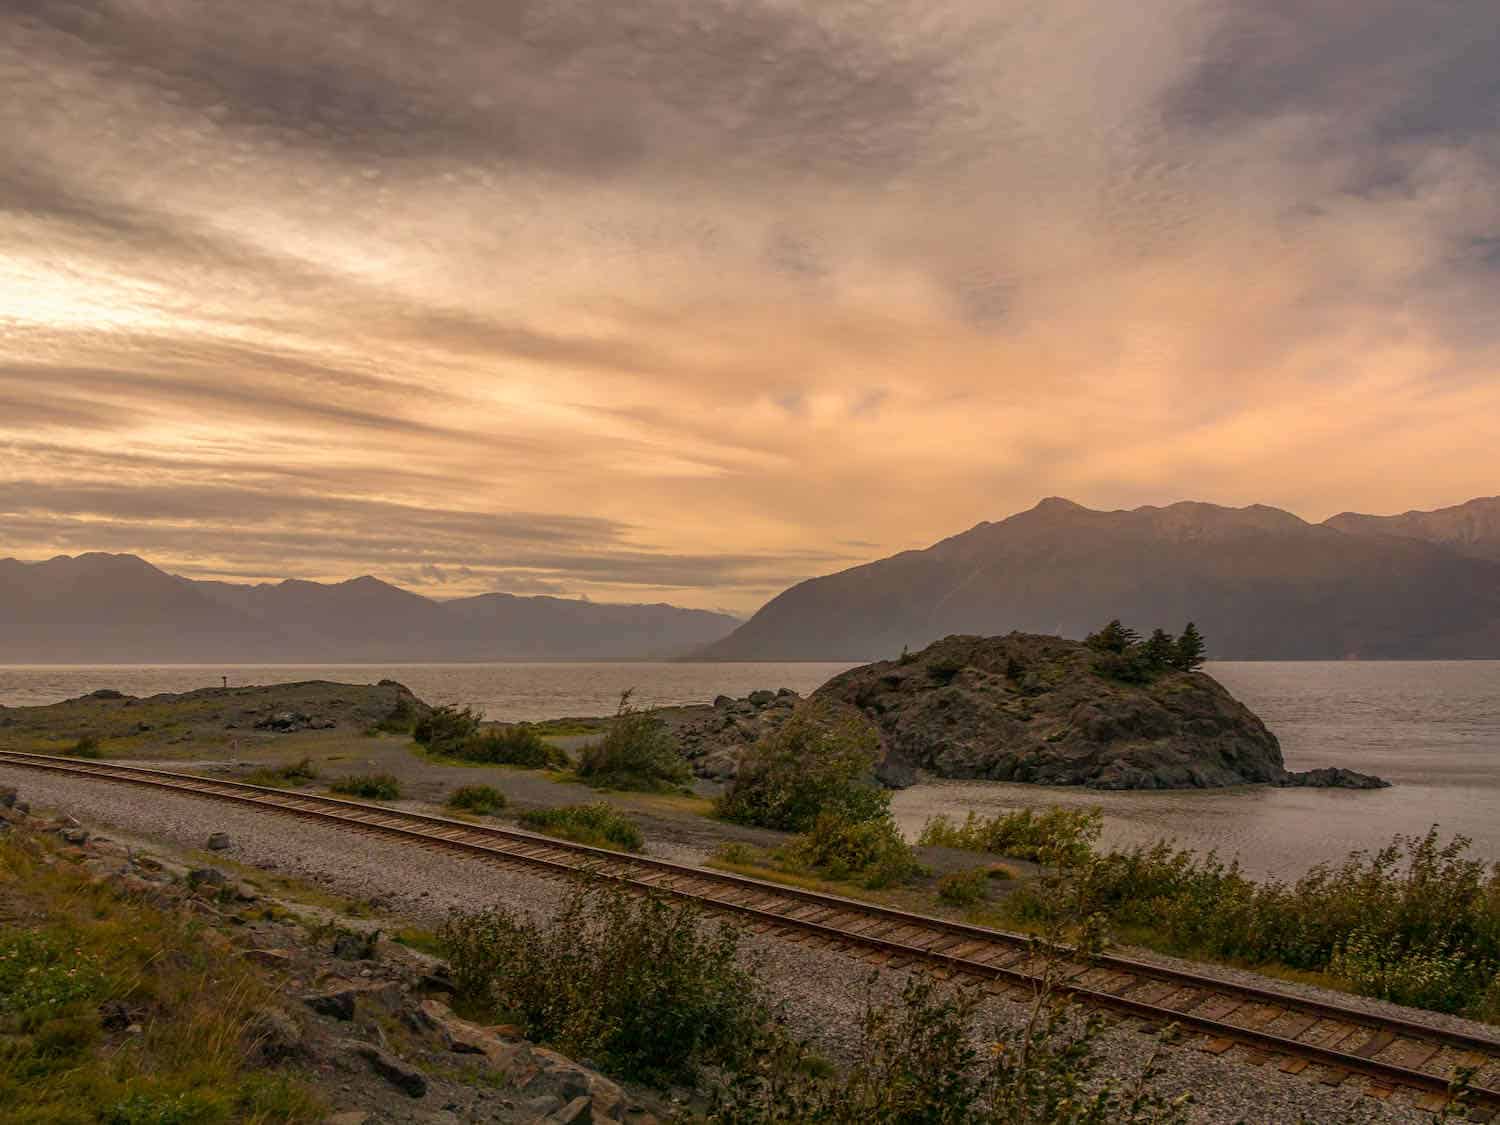 train tracks traveling next to Turnagain Arm on the Seward Highway in Alaska. Mountains in the distance and a cloudy sky with streaks of pale light.